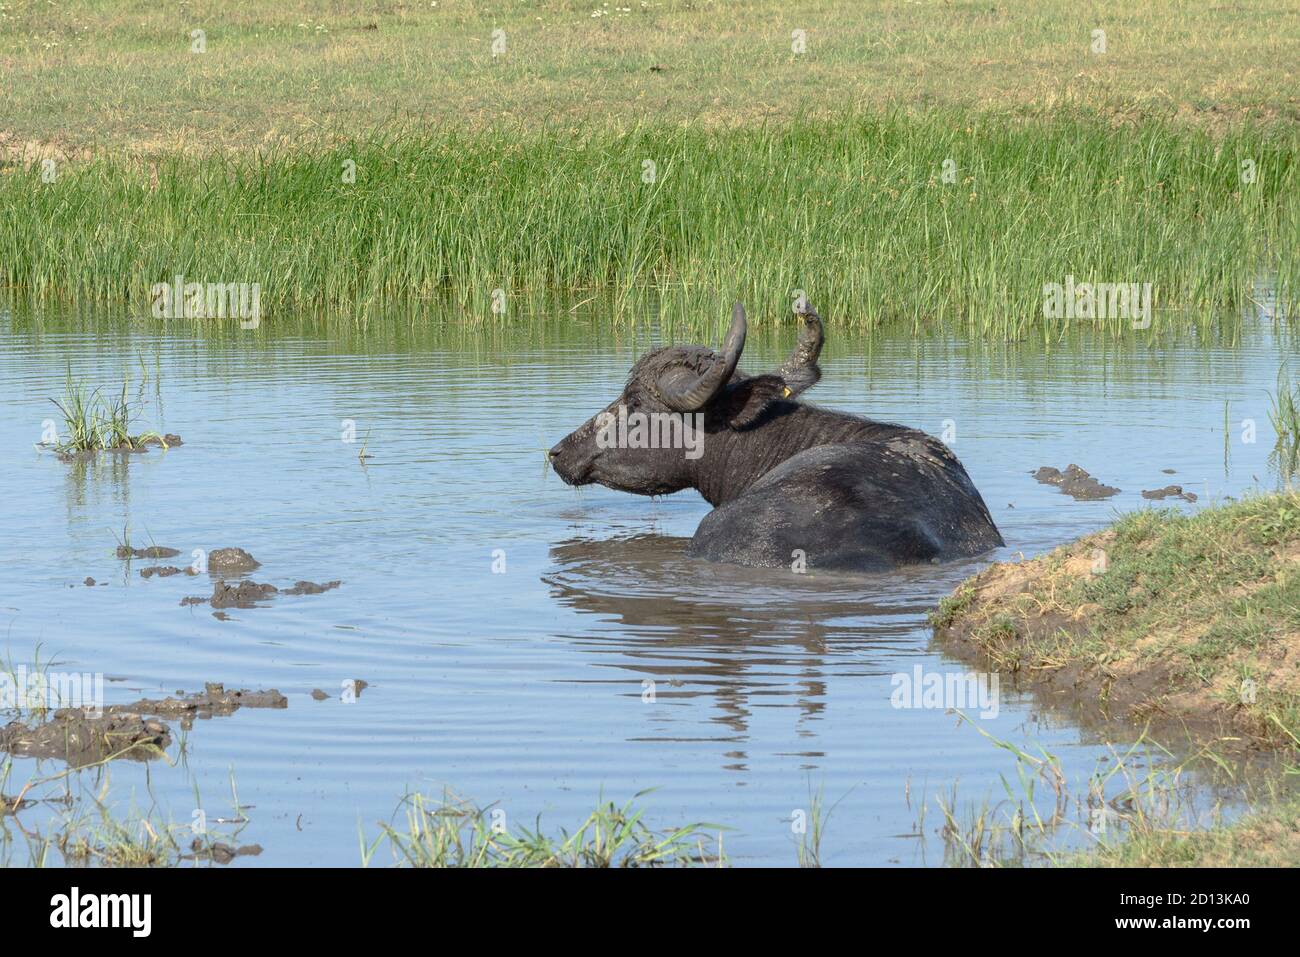 A water buffalo sitting in the water in Hortobagy National Park, Hungary Stock Photo